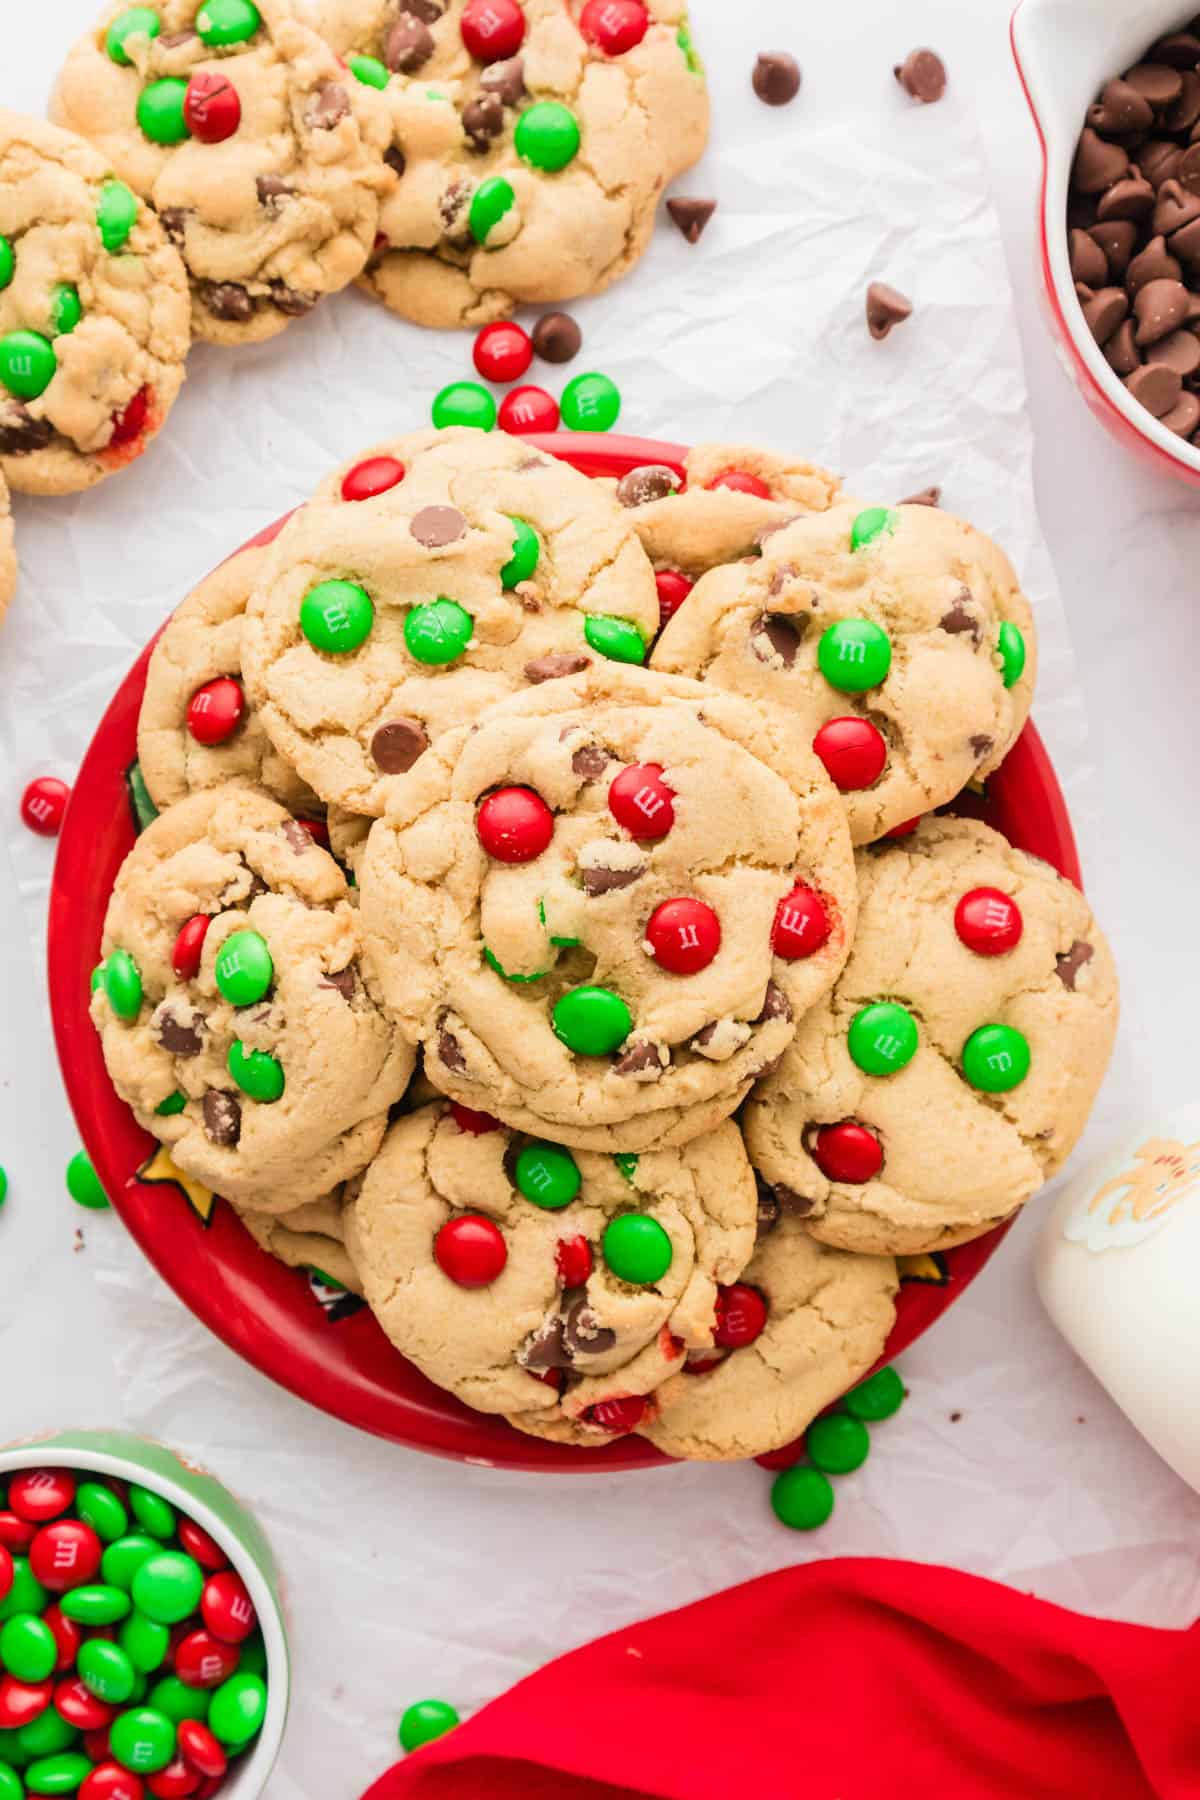 A red plate filled with Christmas cookies with red and green Christmas M&Ms.